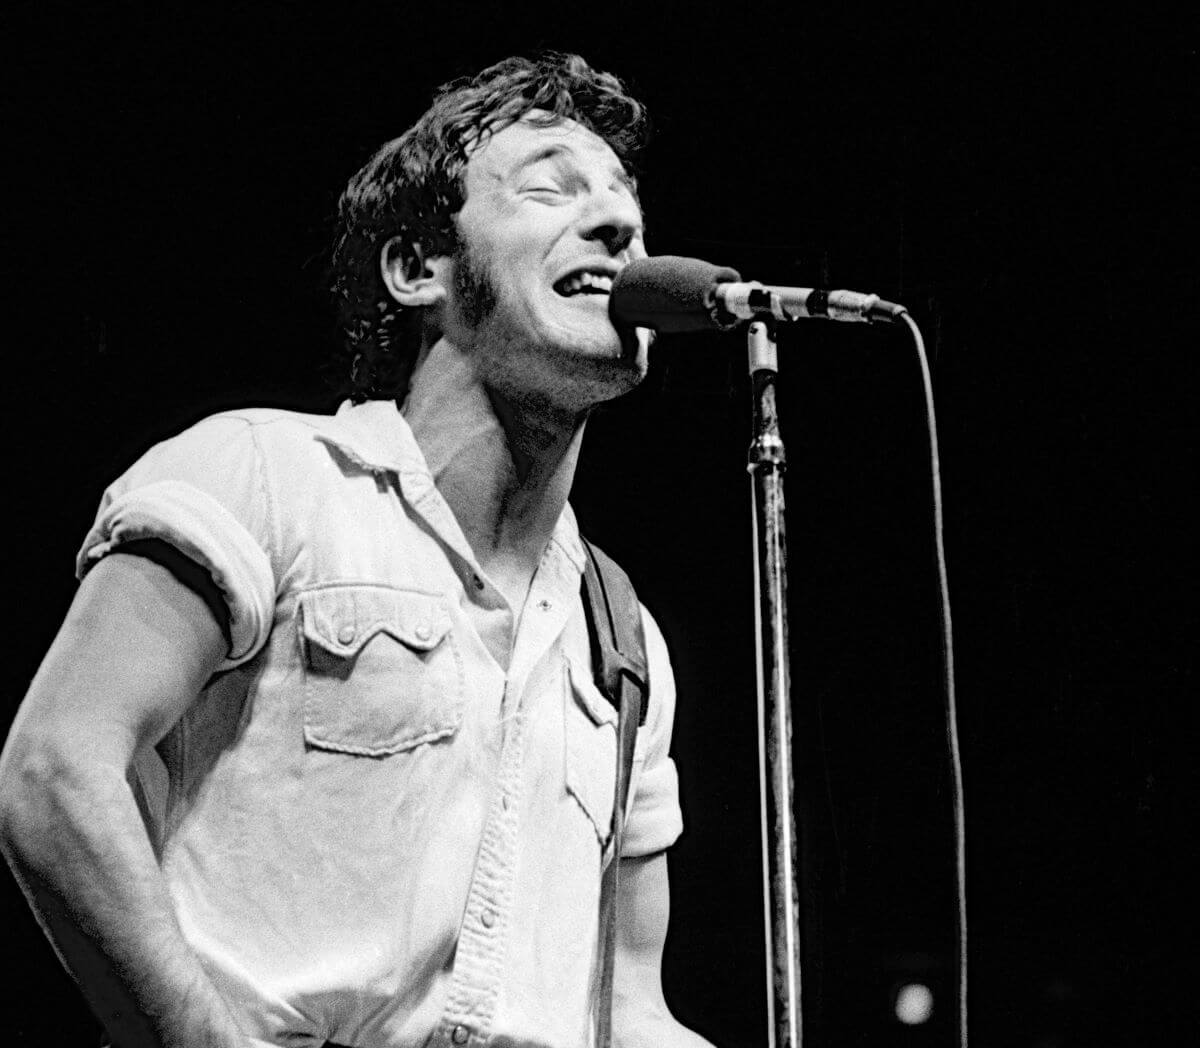 A black and white picture of Bruce Springsteen singing into a microphone.